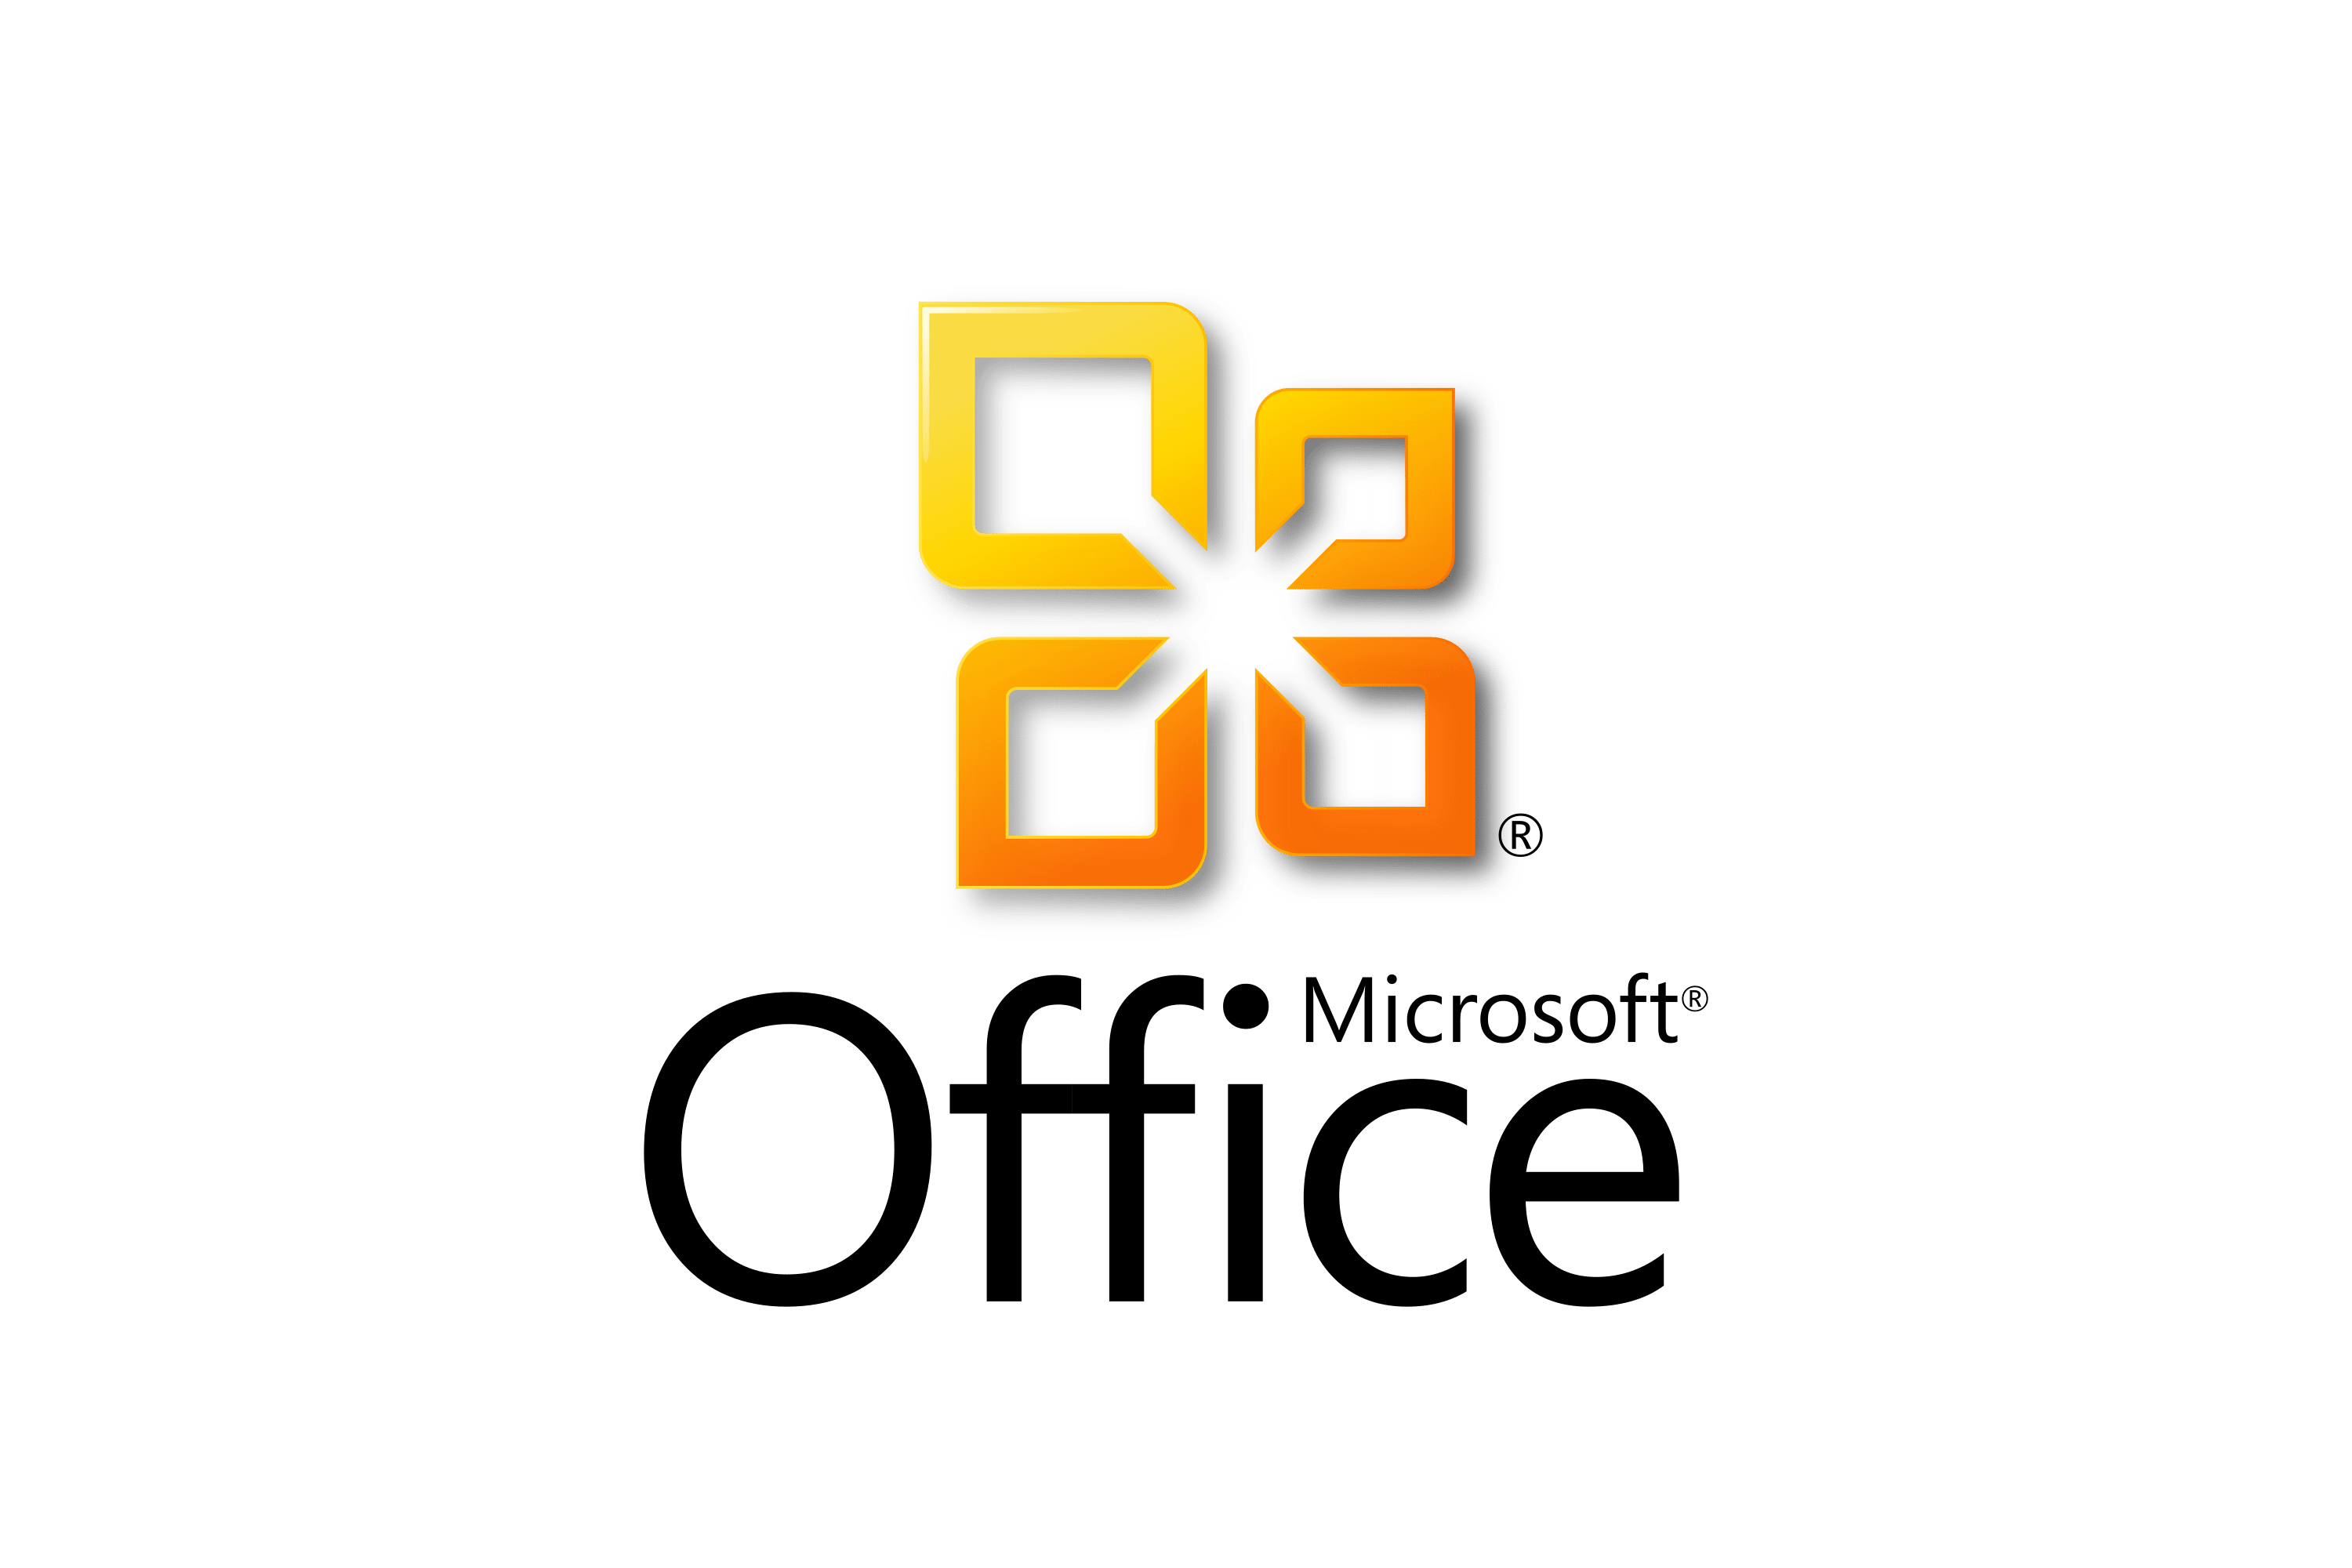 Download Microsoft Office 2010 (Office 14) Logo in SVG Vector or PNG File  Format 